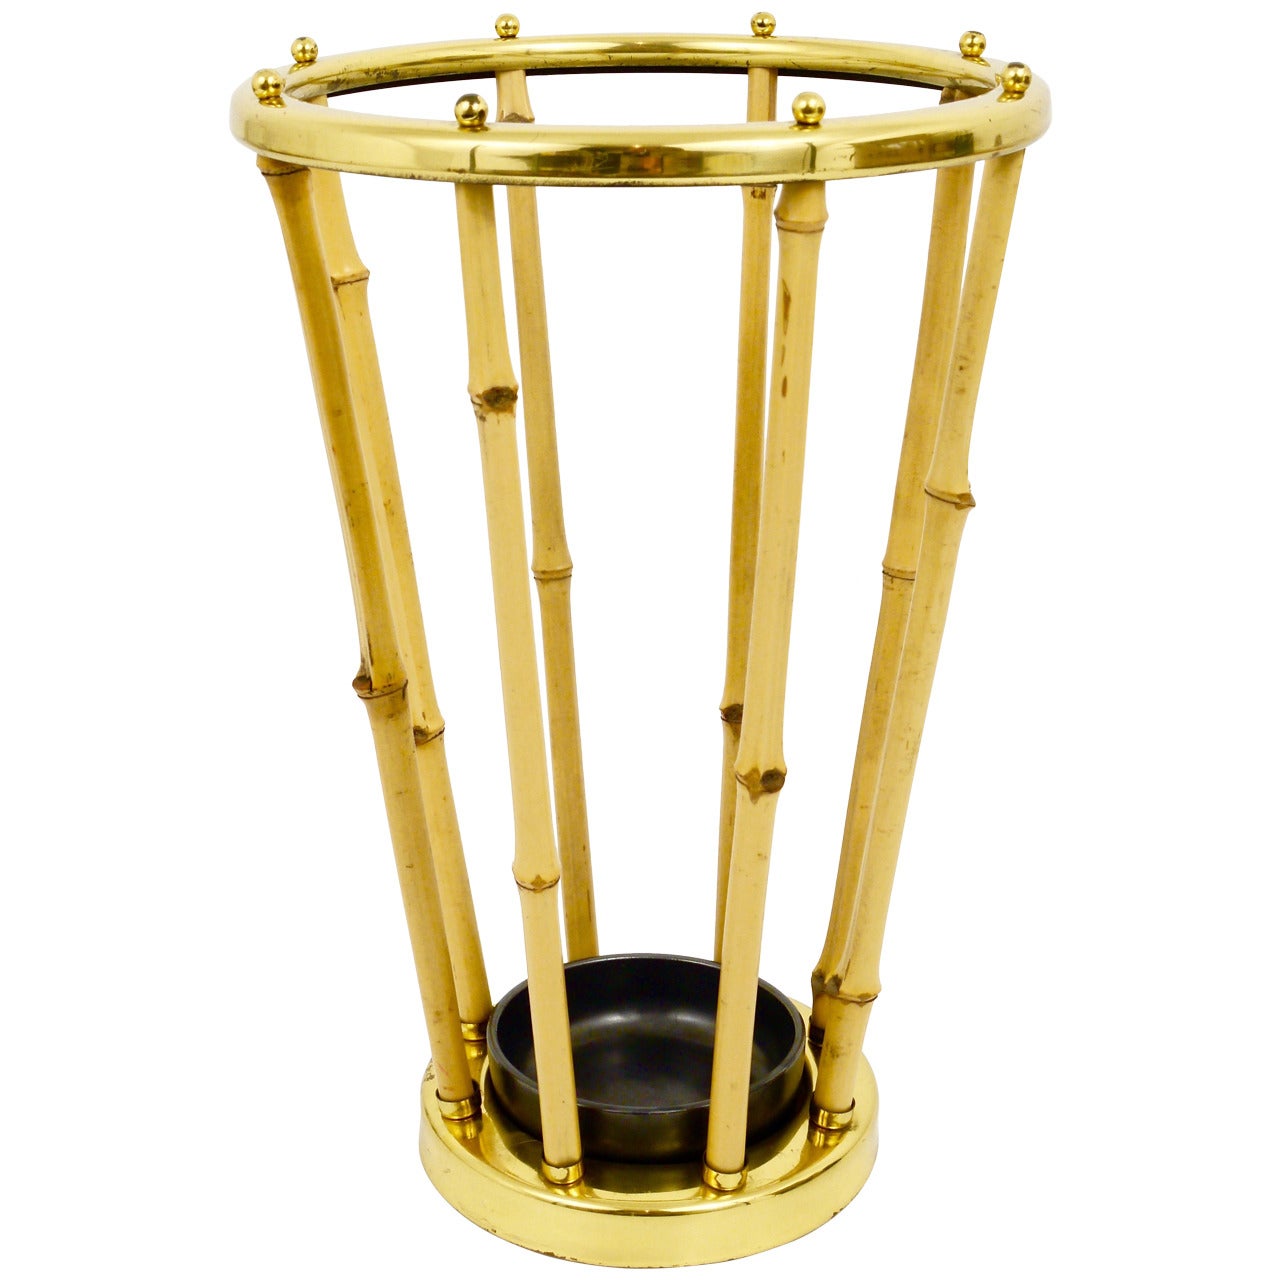 Carl Aubock Style Brass & Bamboo Midcentury Umbrella Stand, Austria, 1950s For Sale